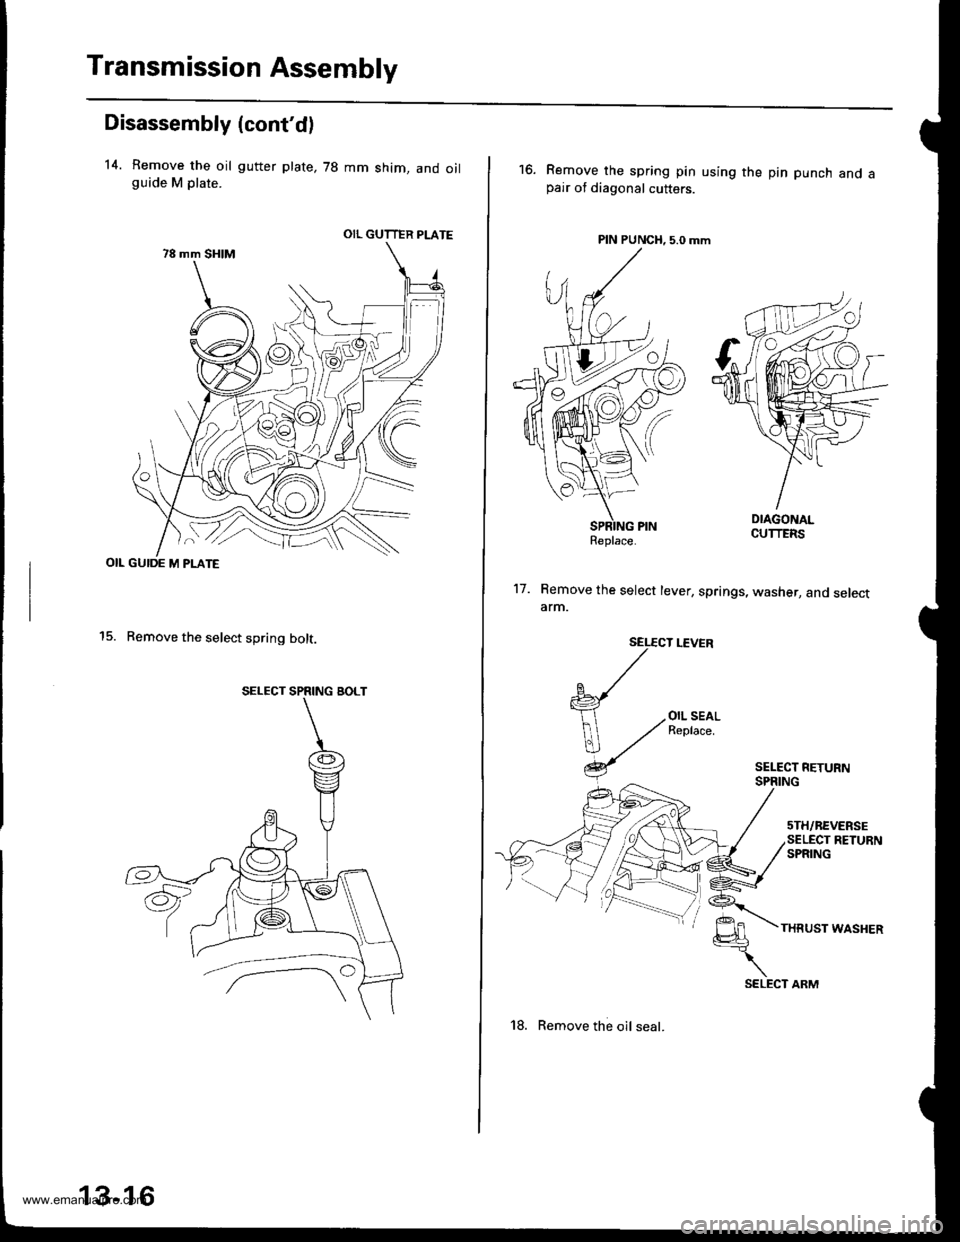 HONDA CR-V 1997 RD1-RD3 / 1.G Service Manual 
Transmission Assembly
Disassembly (contdl
14. Remove the oil gutter plate, 78 mm shim, and oilguide M plate.
OIL GUIDE M PLATE
15. Remove the select spring bolt.
OIL GUTTER PLATE
SELECT SPRING BOLT
